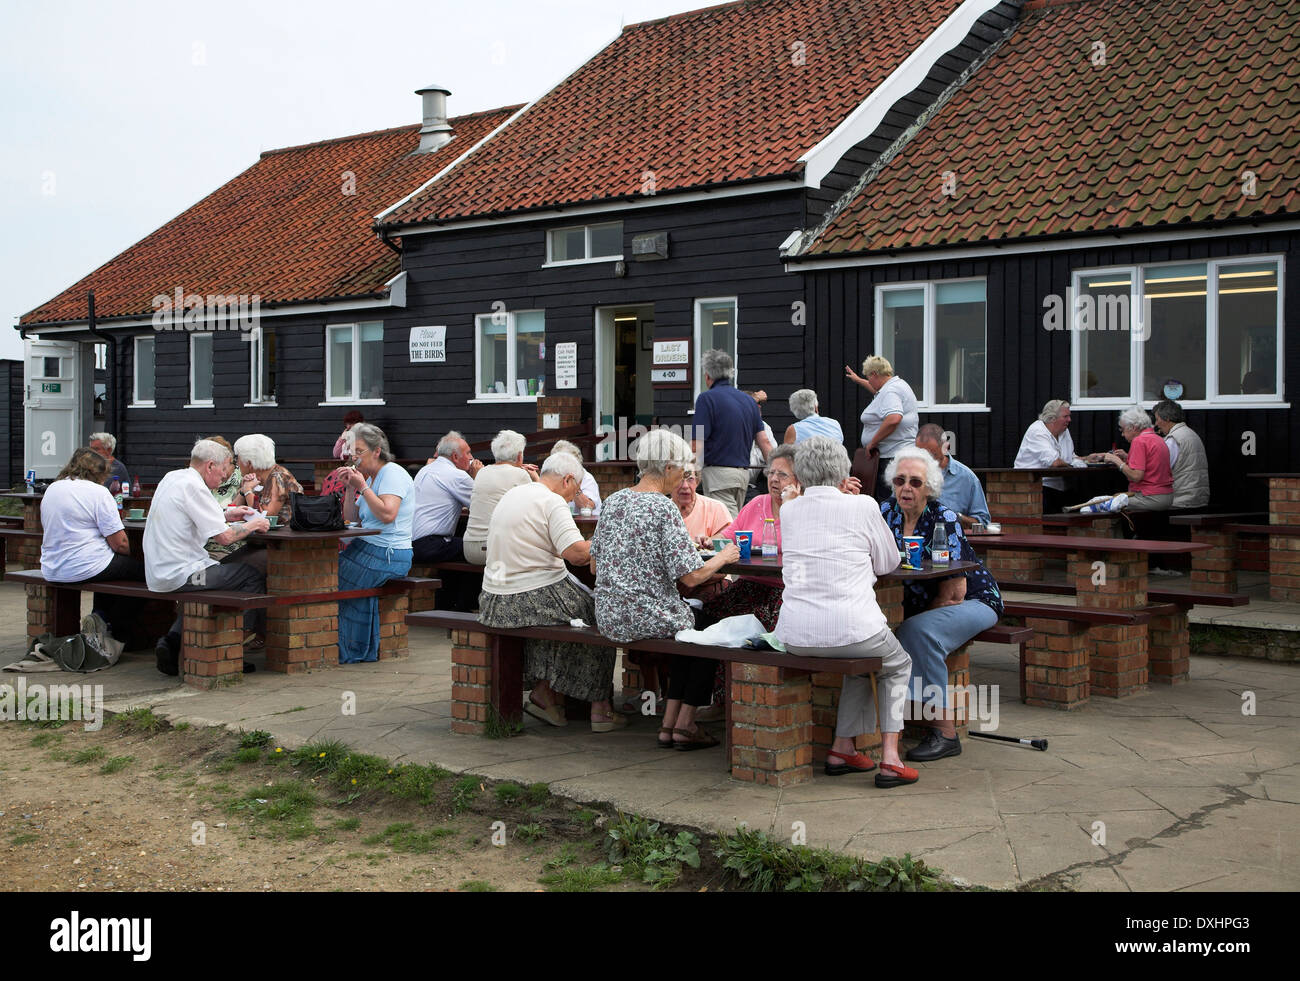 Elderly people eating outside eating fish and chips at the Flora tea rooms cafe, Dunwich, Suffolk, England, Stock Photo